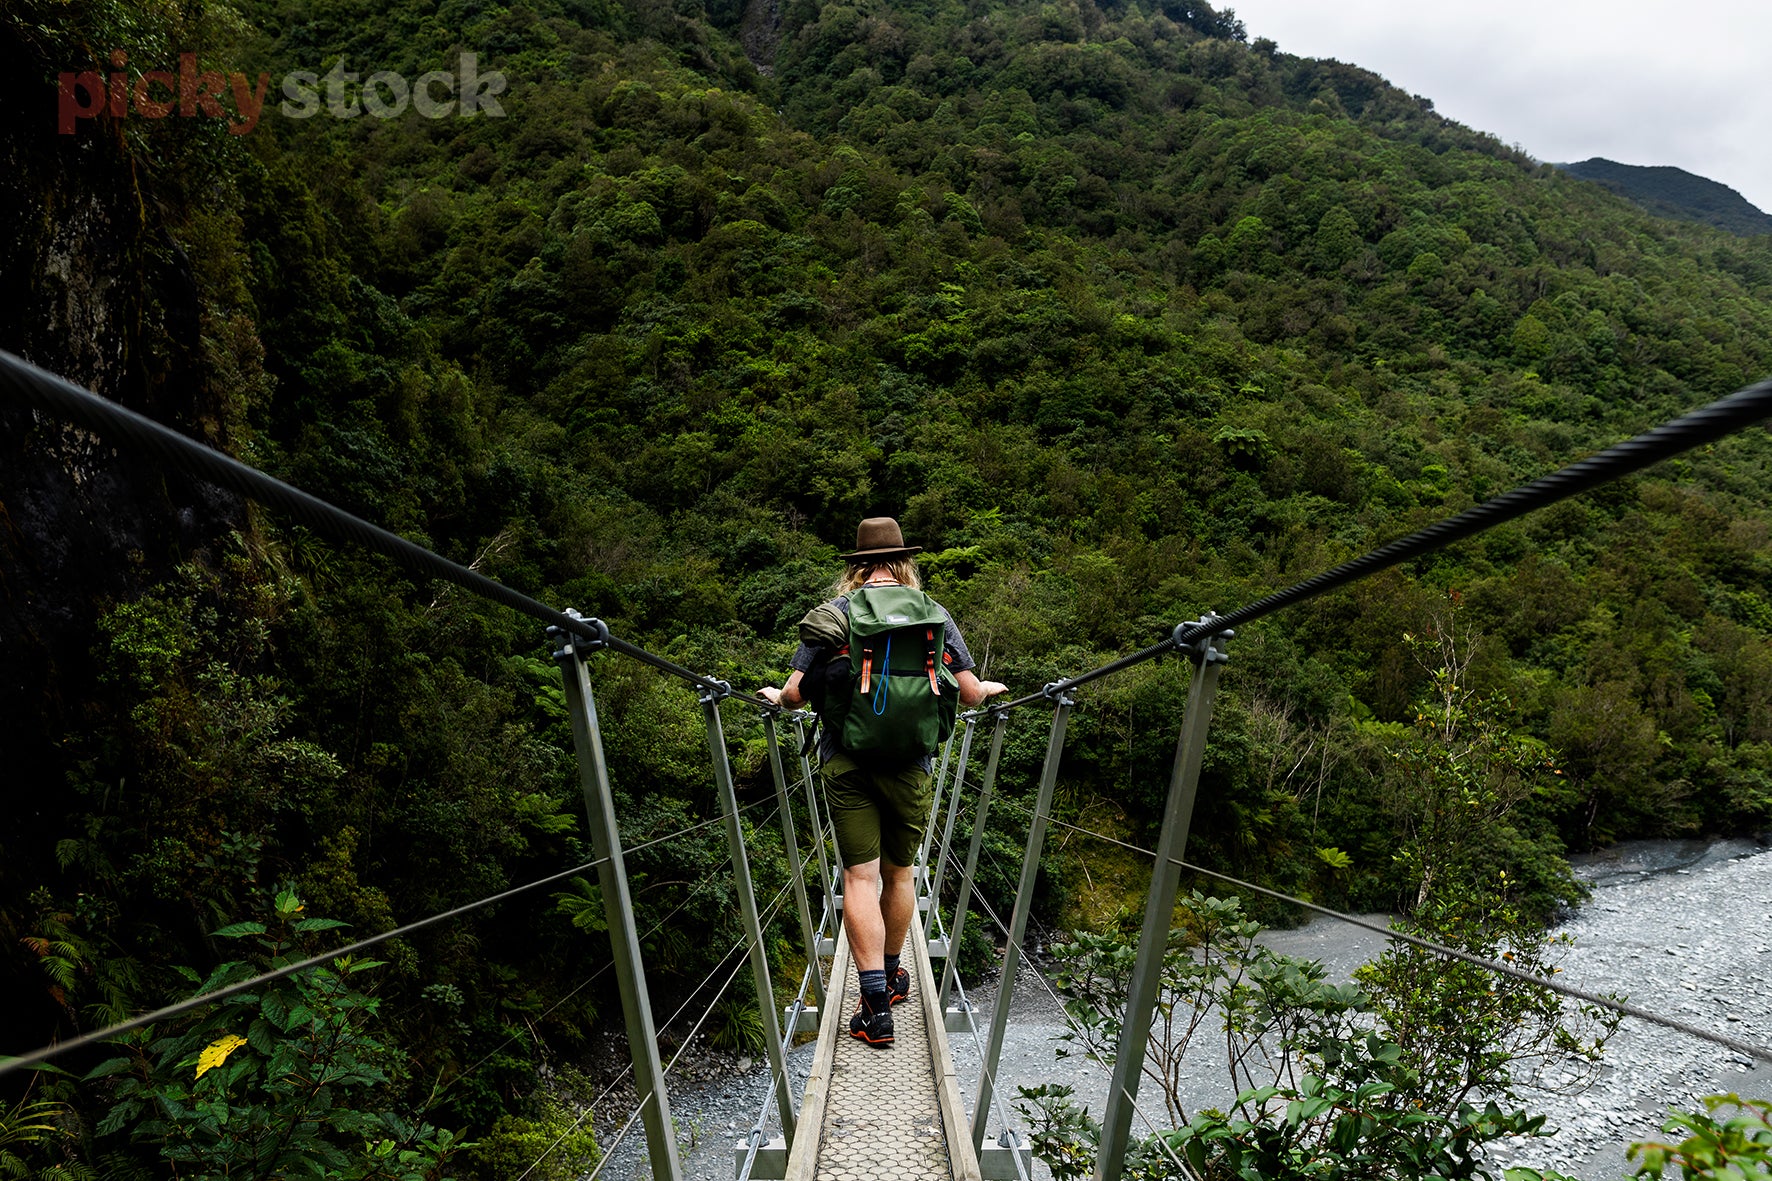 Low angle of man wearing brown hat walking through dense green bush on a hike. Wearing large green tramping backpack. Going over bridge towards a large bush forest area.  River is visible below bridge.  